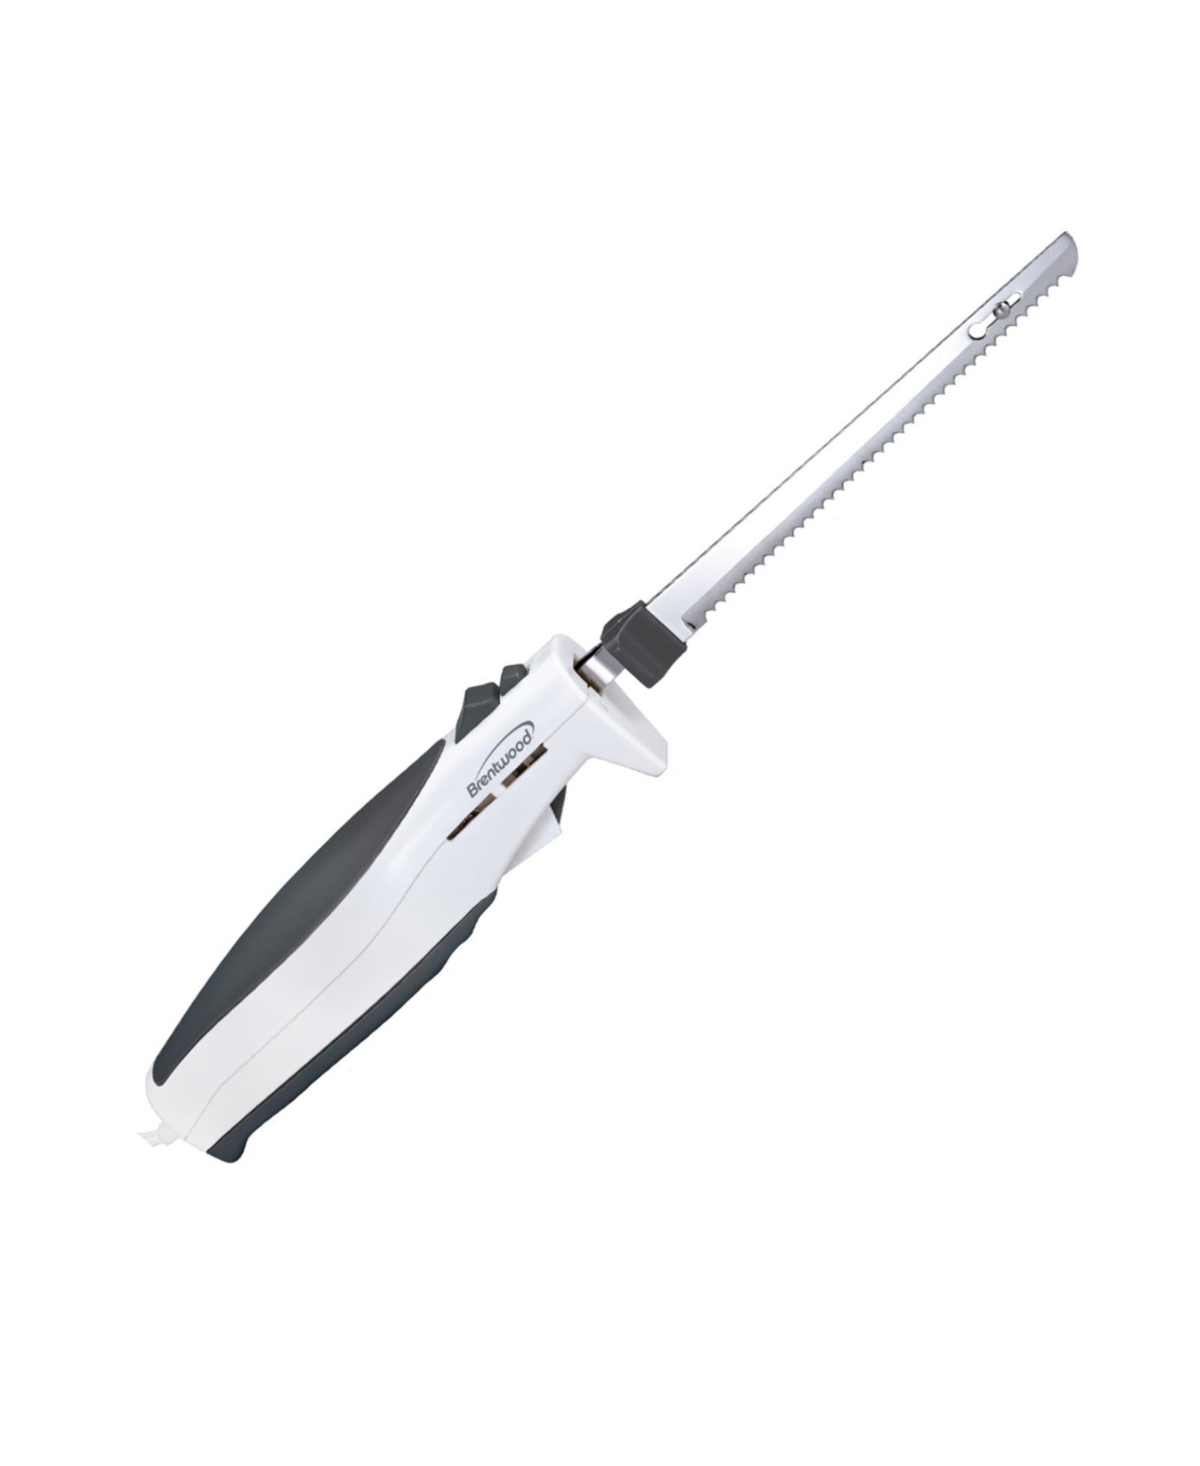 BRENTWOOD APPLIANCES BRENTWOOD 7.5-INCH ELECTRIC CARVING KNIFE IN WHITE